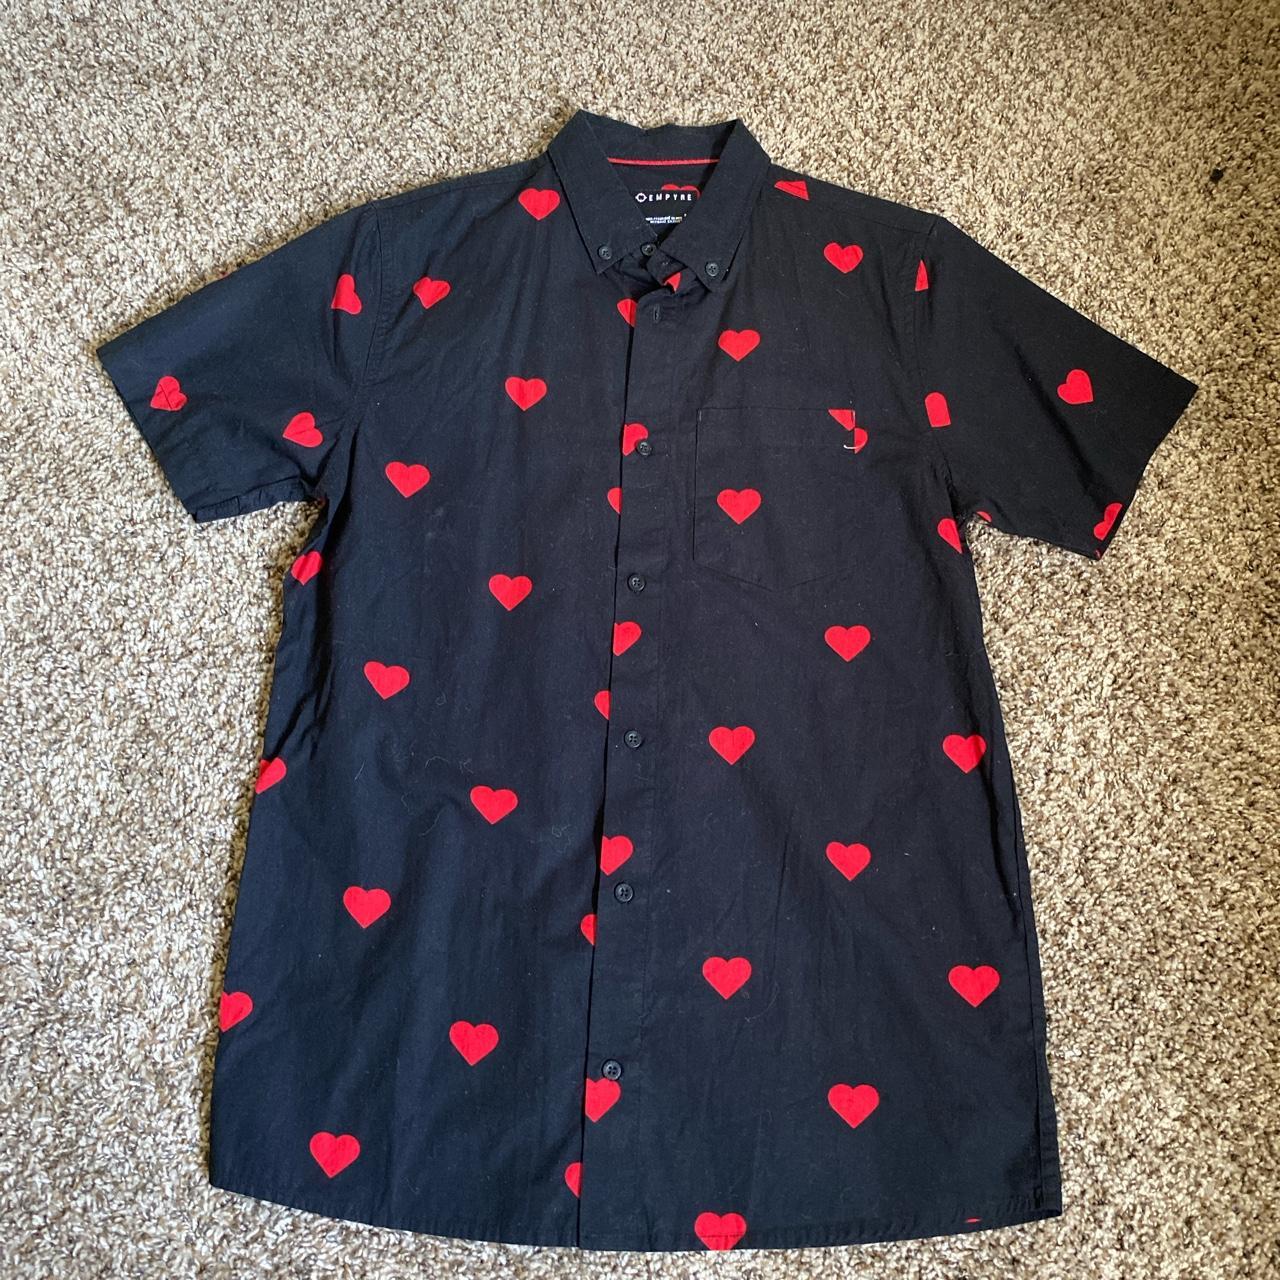 Supreme Hearts Rayon Shirt Cheapest Dealers | www.btsenergia.com.br